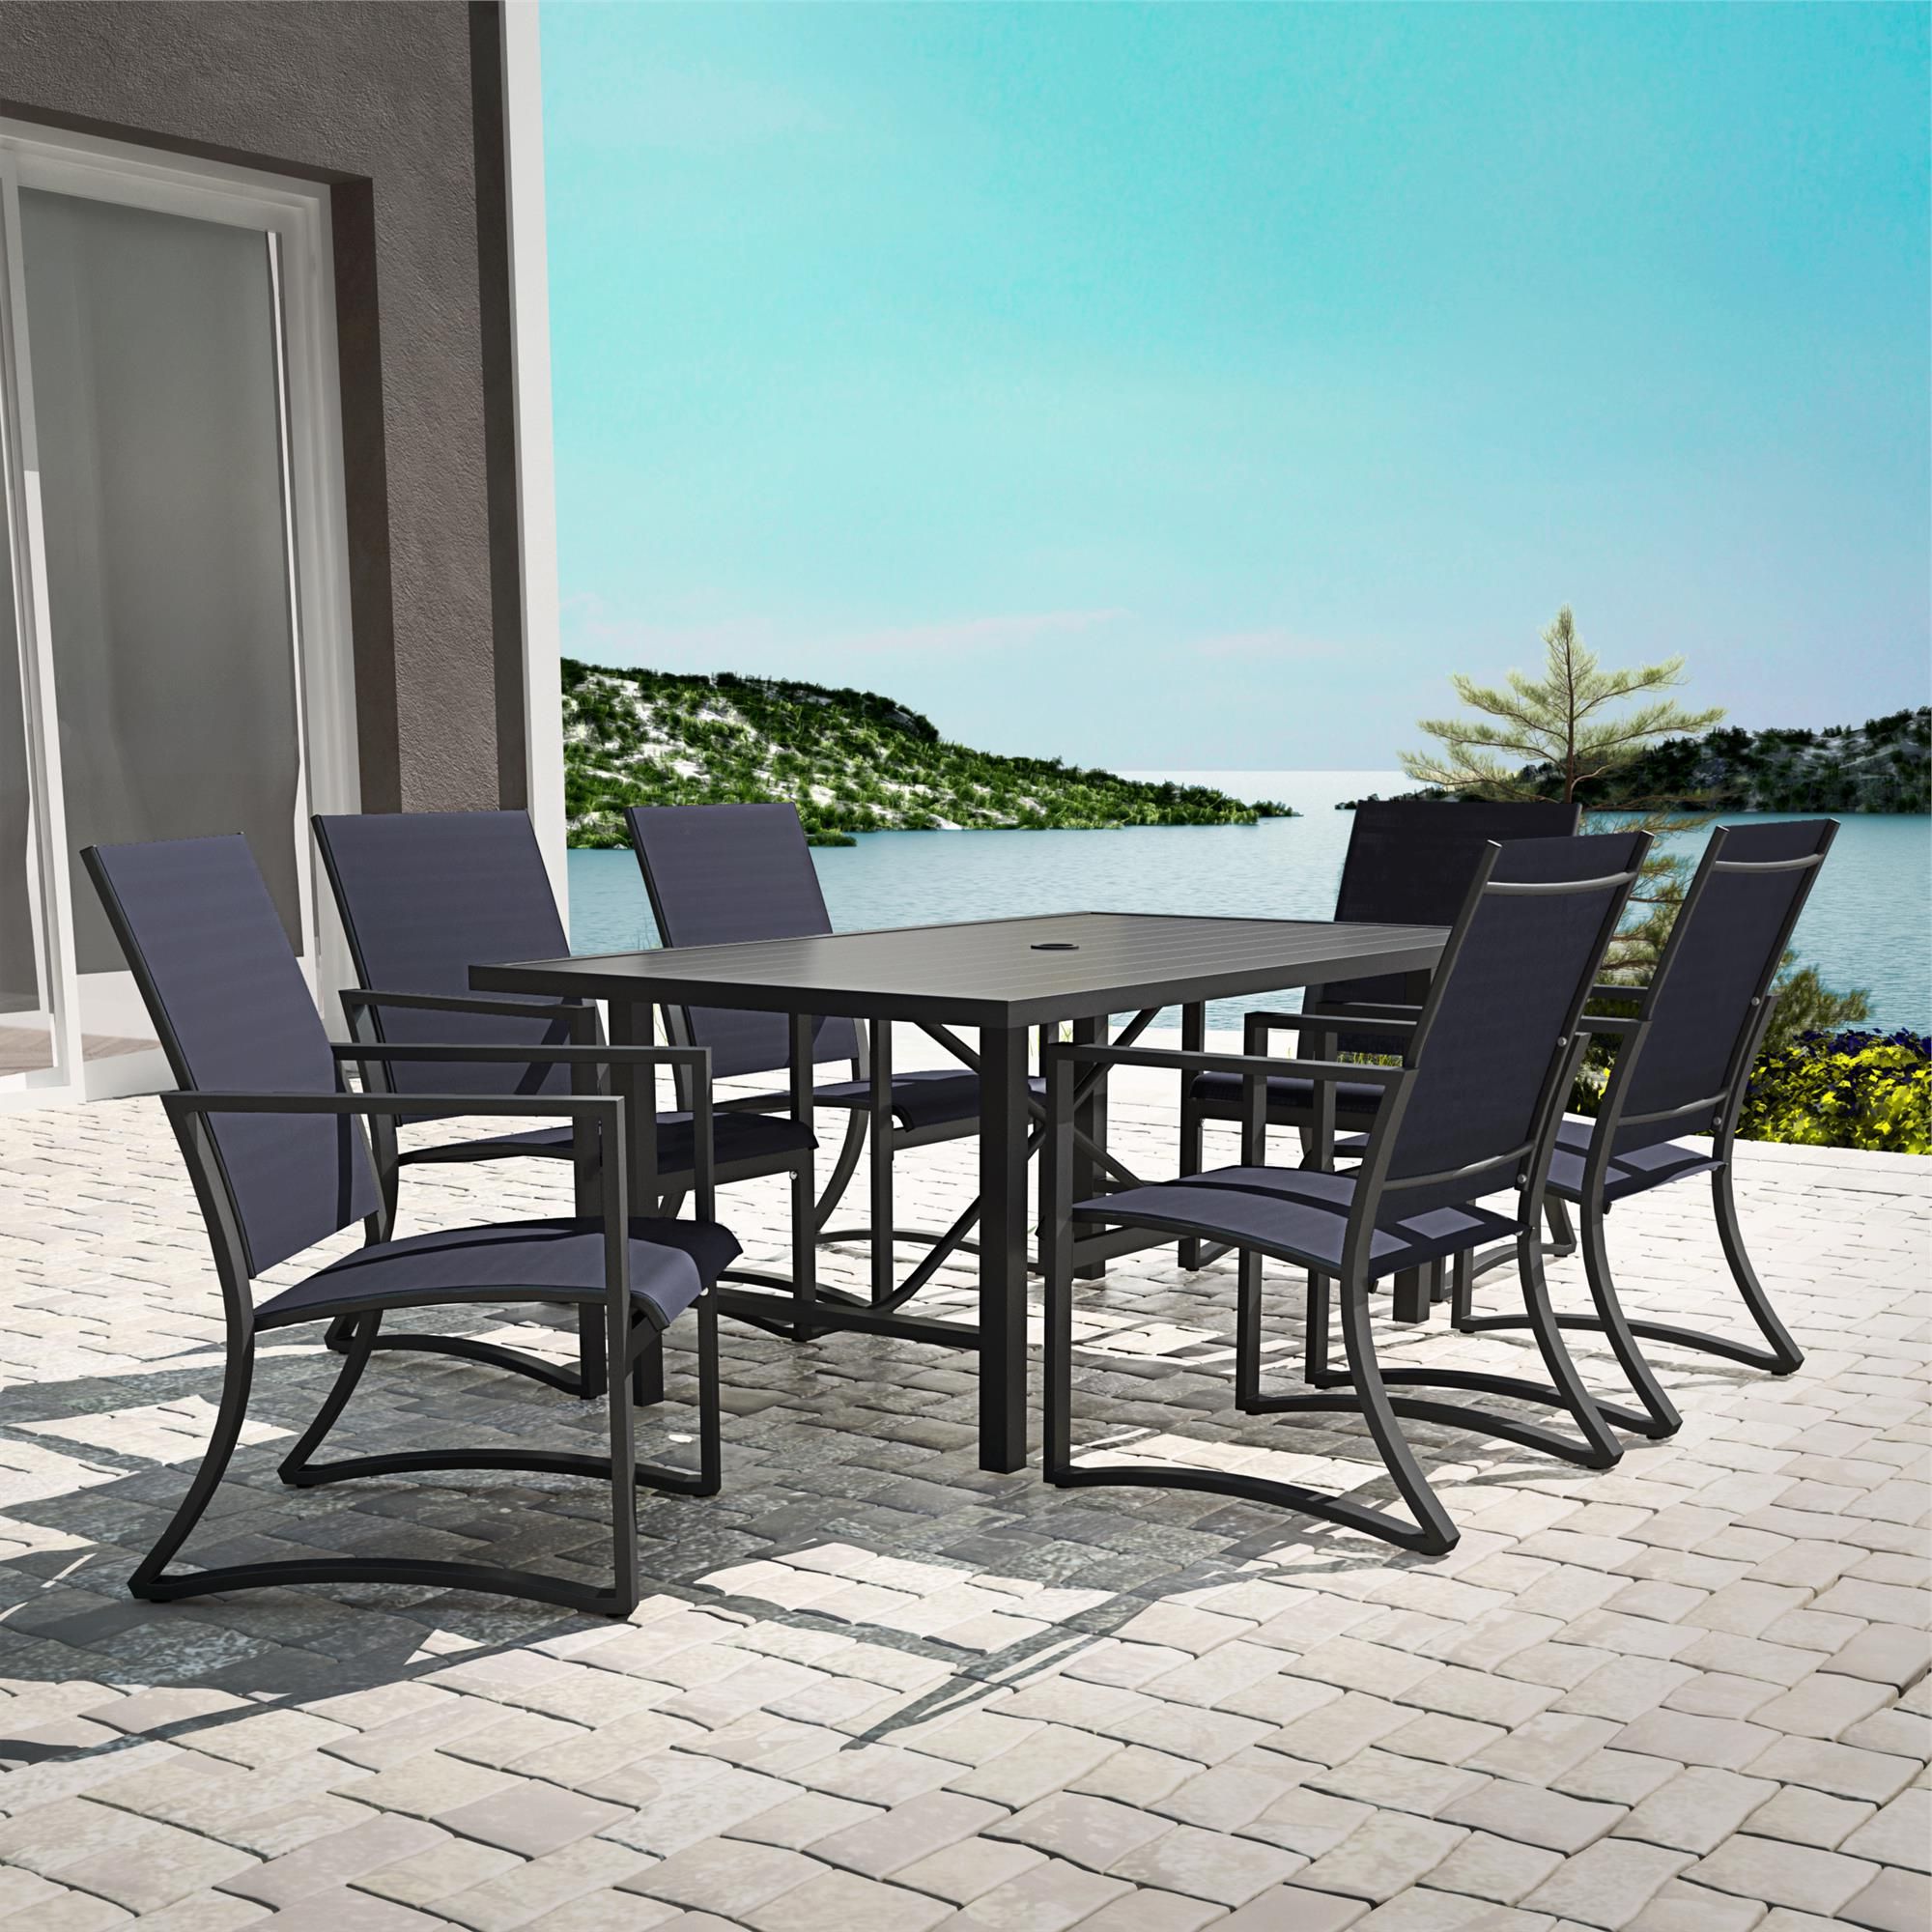 Navy Outdoor Seating Sets Pertaining To Current Cosco Outdoor Furniture, 7 Piece Patio Dining Set, Steel, Navy Sling (View 11 of 15)